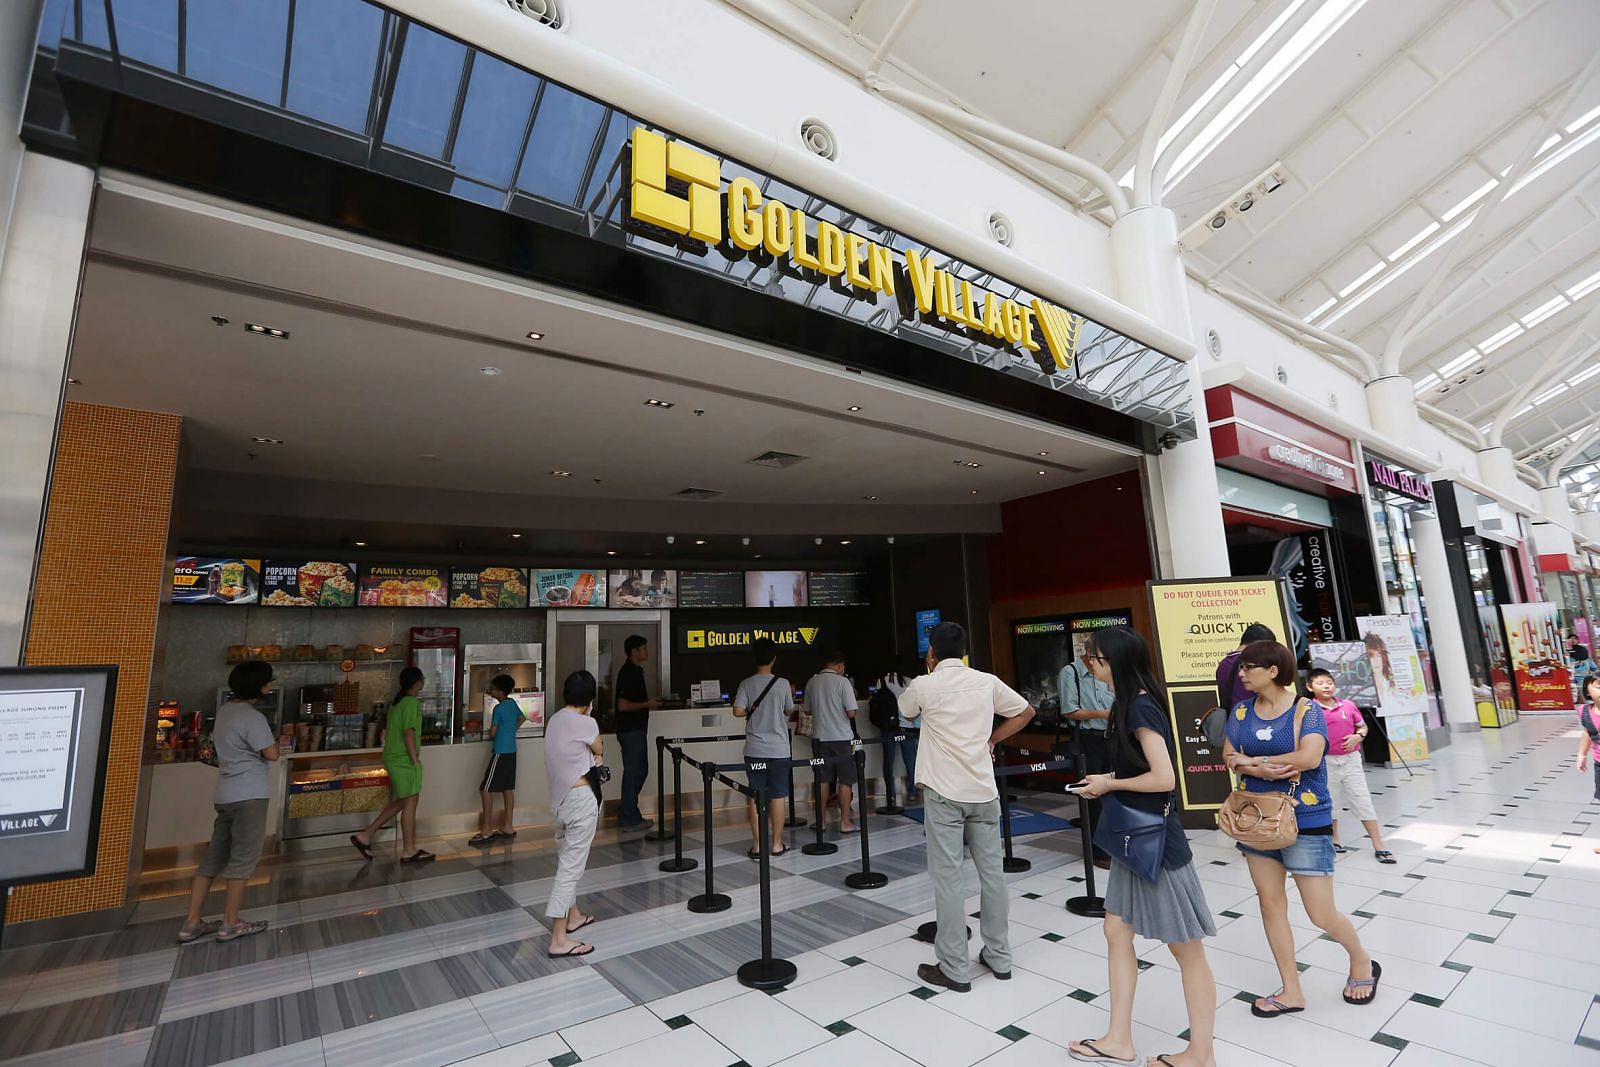 mm2 Asia to acquire LFS cinemas for RM118 million